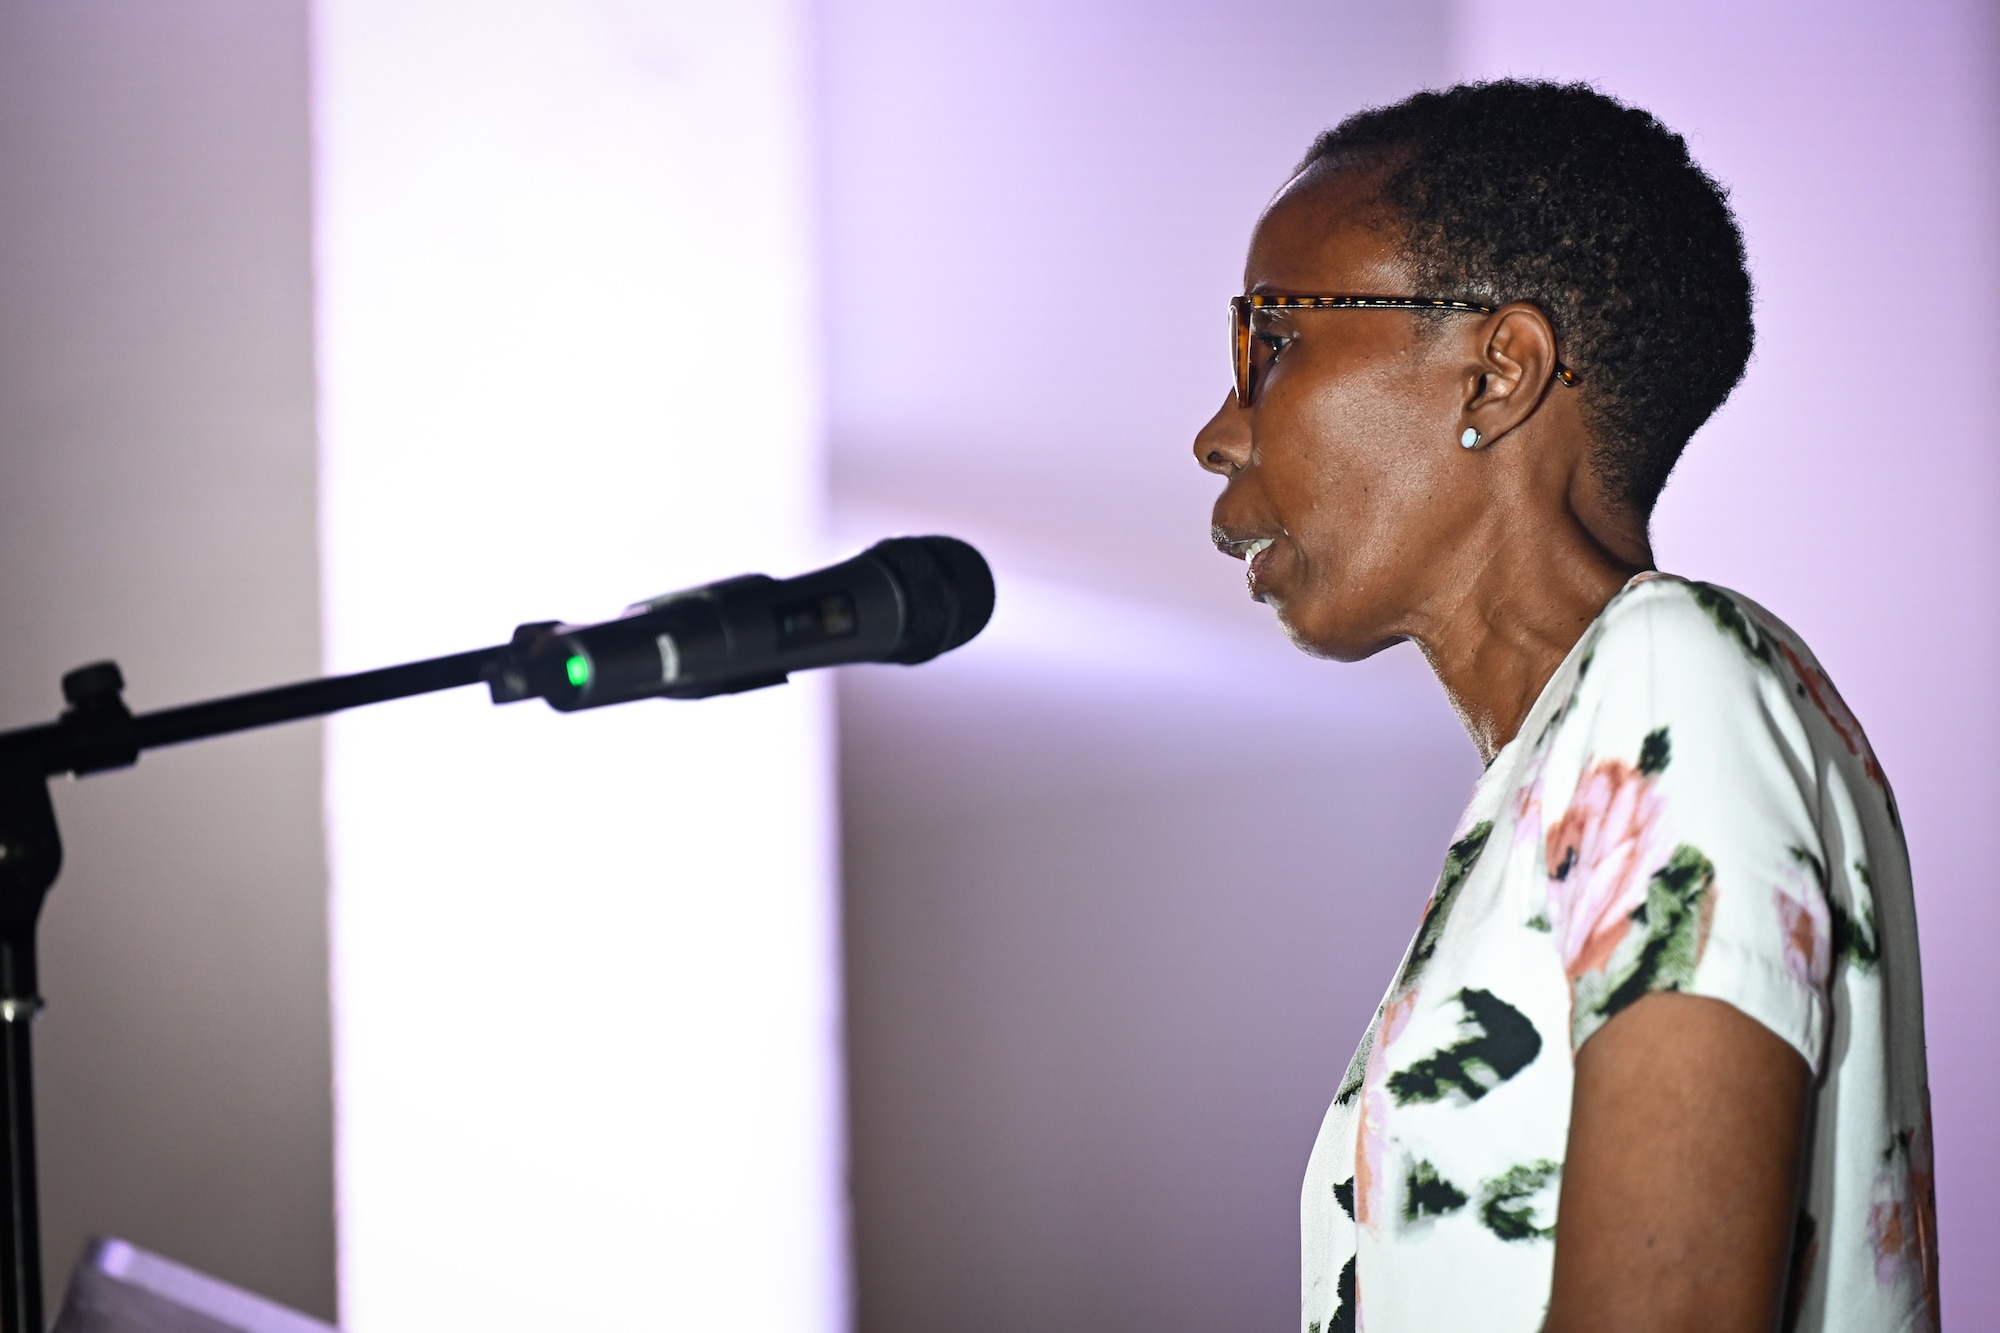 Dr. Arlette Charles, Owen King European Union Hospital chief of surgery, gives remarks during the closing ceremony for the Lesser Antilles Medical Assistance Team mission in Castries, St. Lucia, March 6, 2024. The team successfully performed 50 surgeries while providing valuable best practices to host nation medical personnel, enabling local facilities to build greater vascular surgery capacity for patients. (U.S. Air Force photo by Staff Sgt. Madeline Herzog)